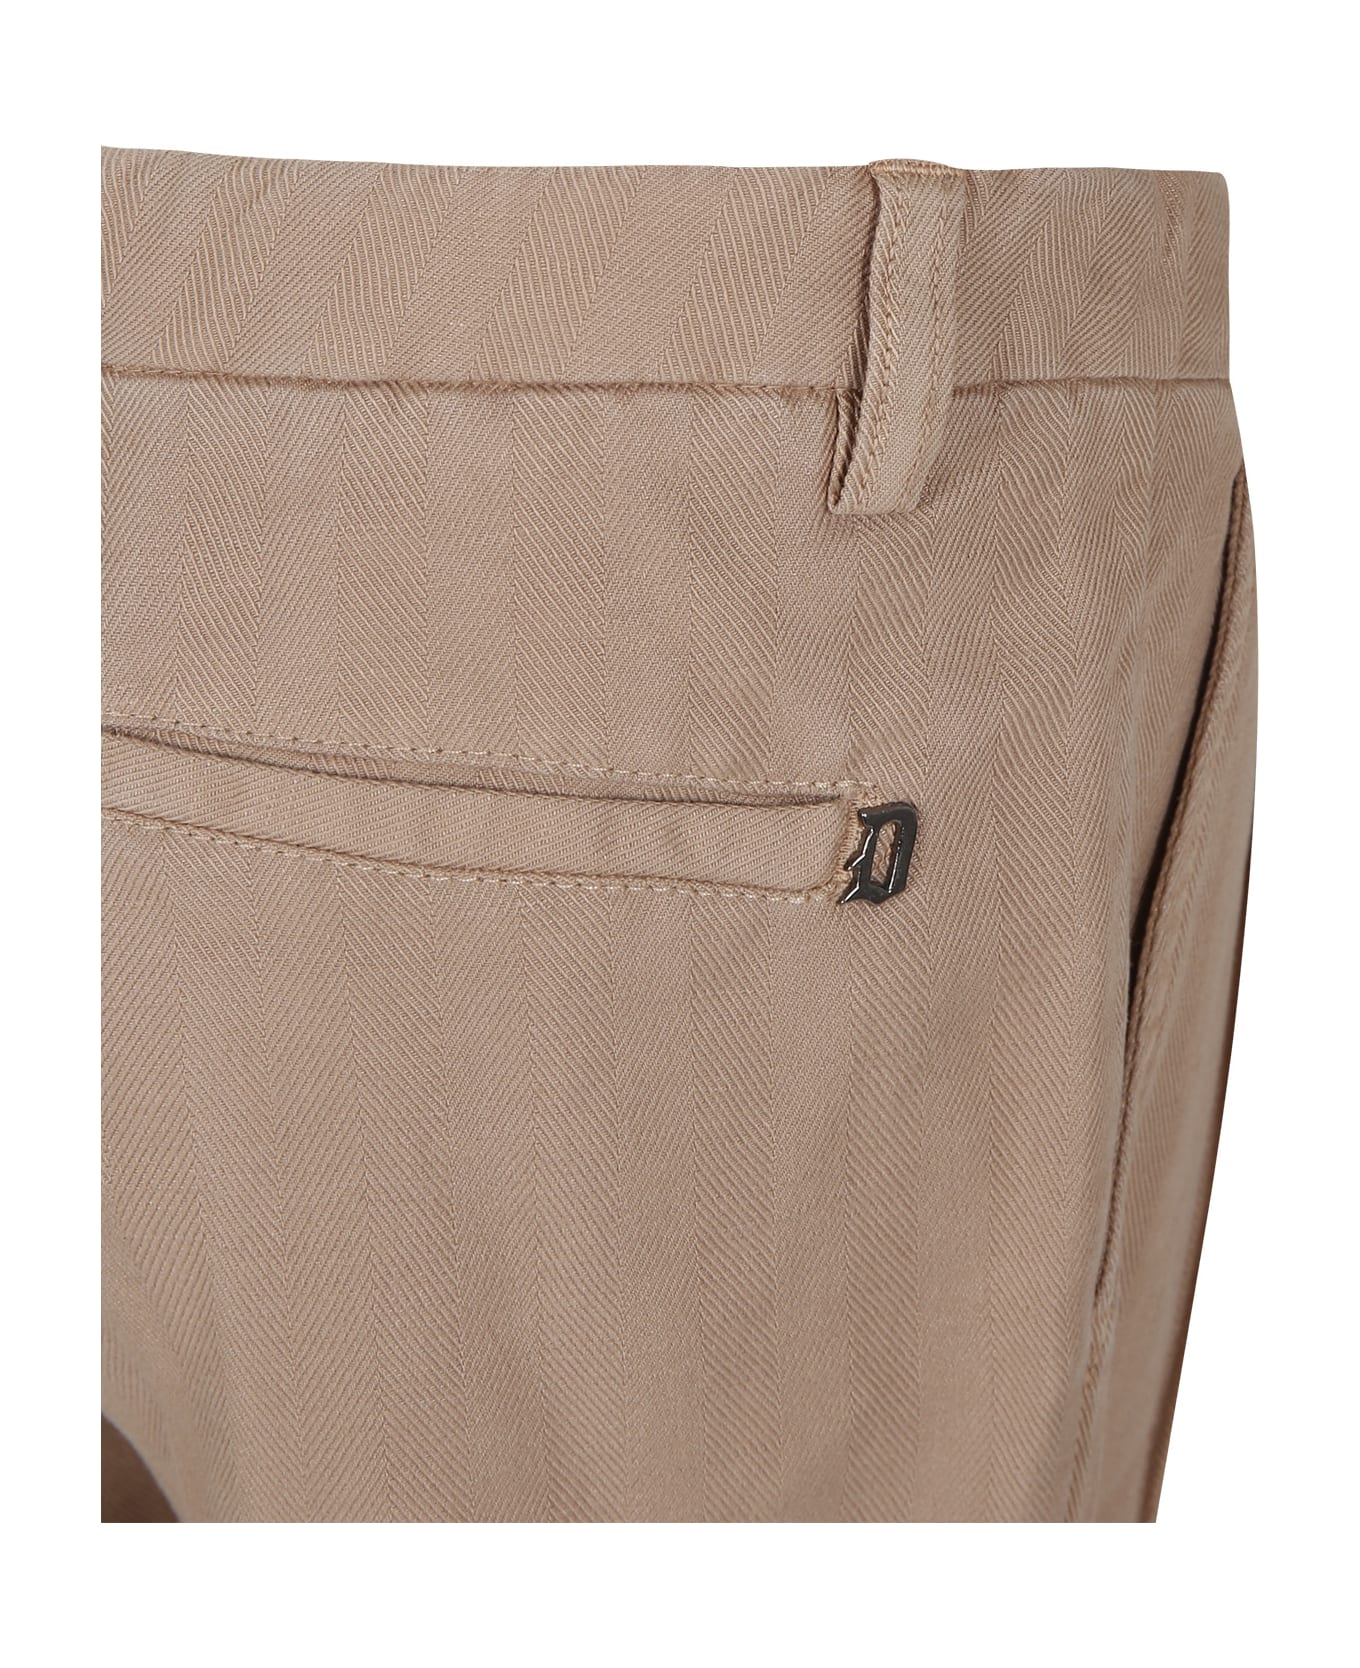 Dondup Beige Trousers For Boy With Logo - Brown ボトムス